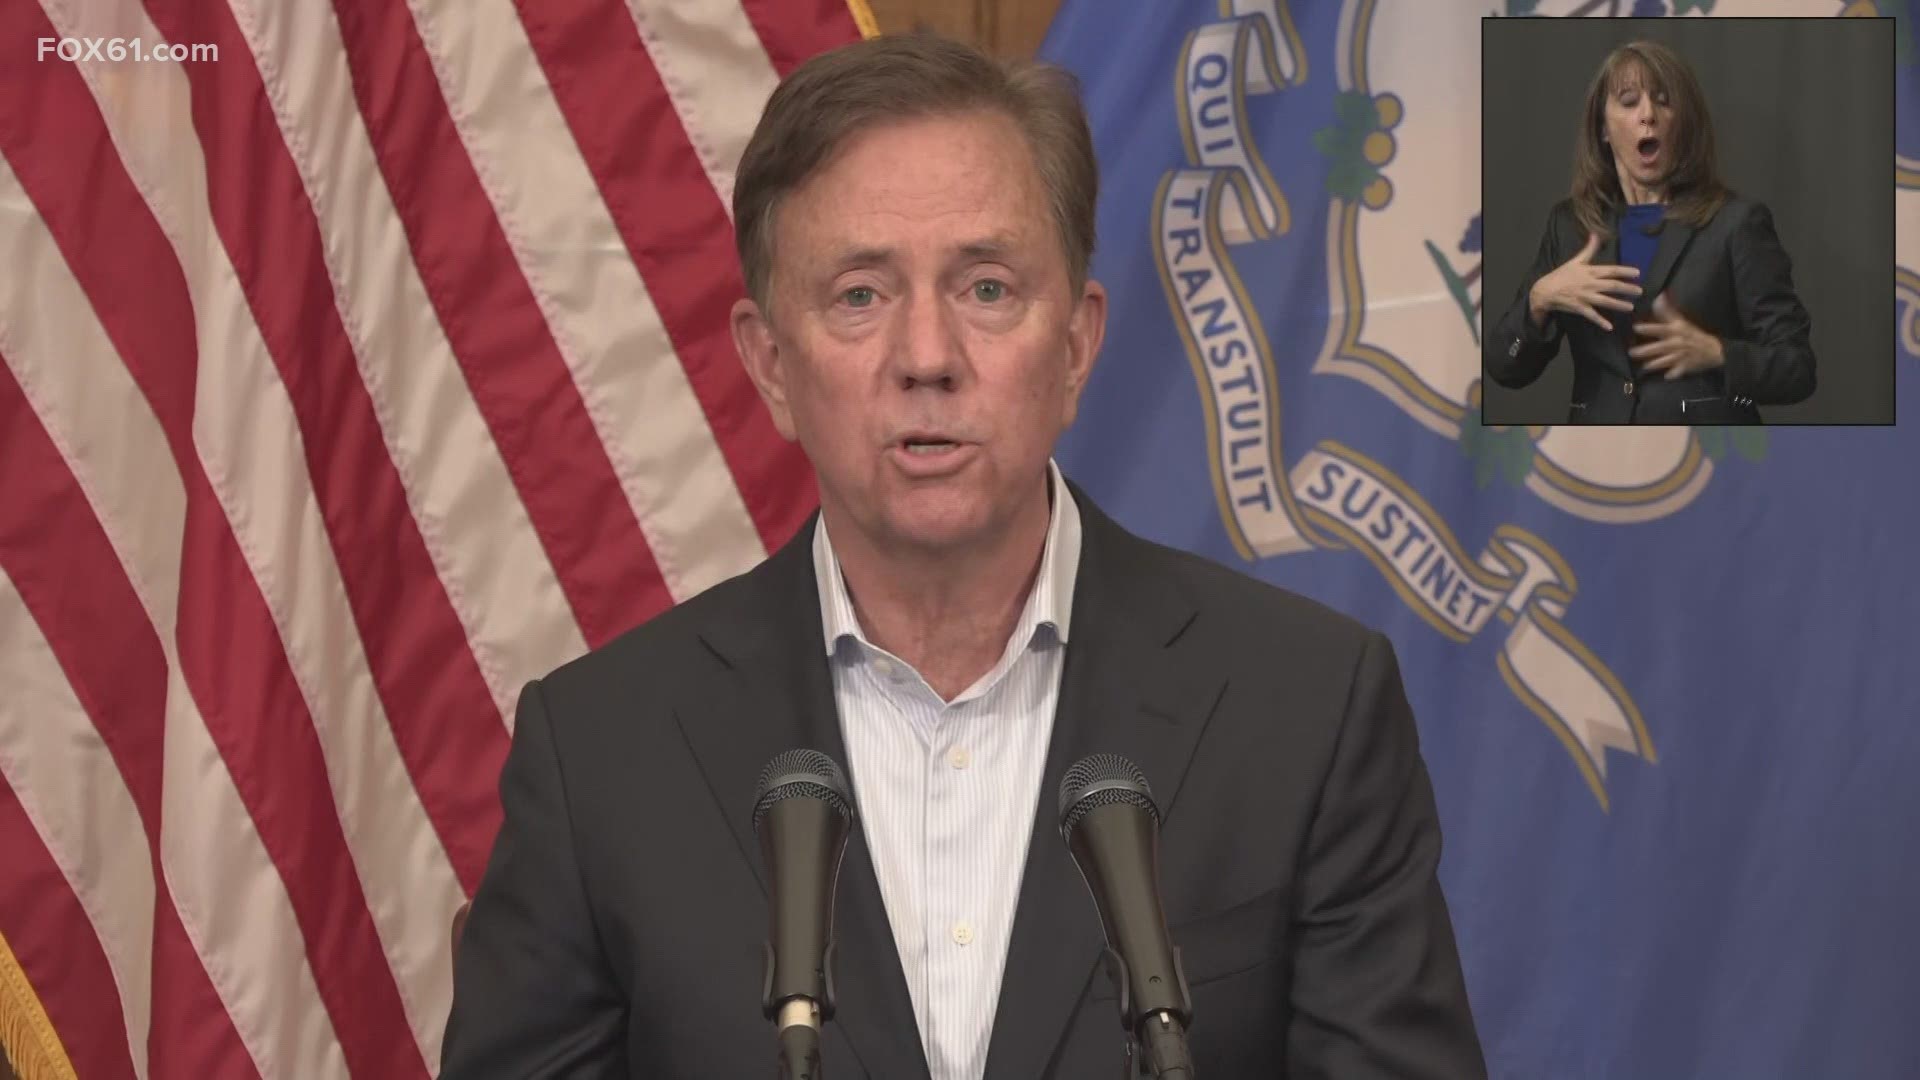 Governor Lamont's office released the latest COVID-19 statistics showing Connecticut has now reported 5,020 COVID-19 related deaths.